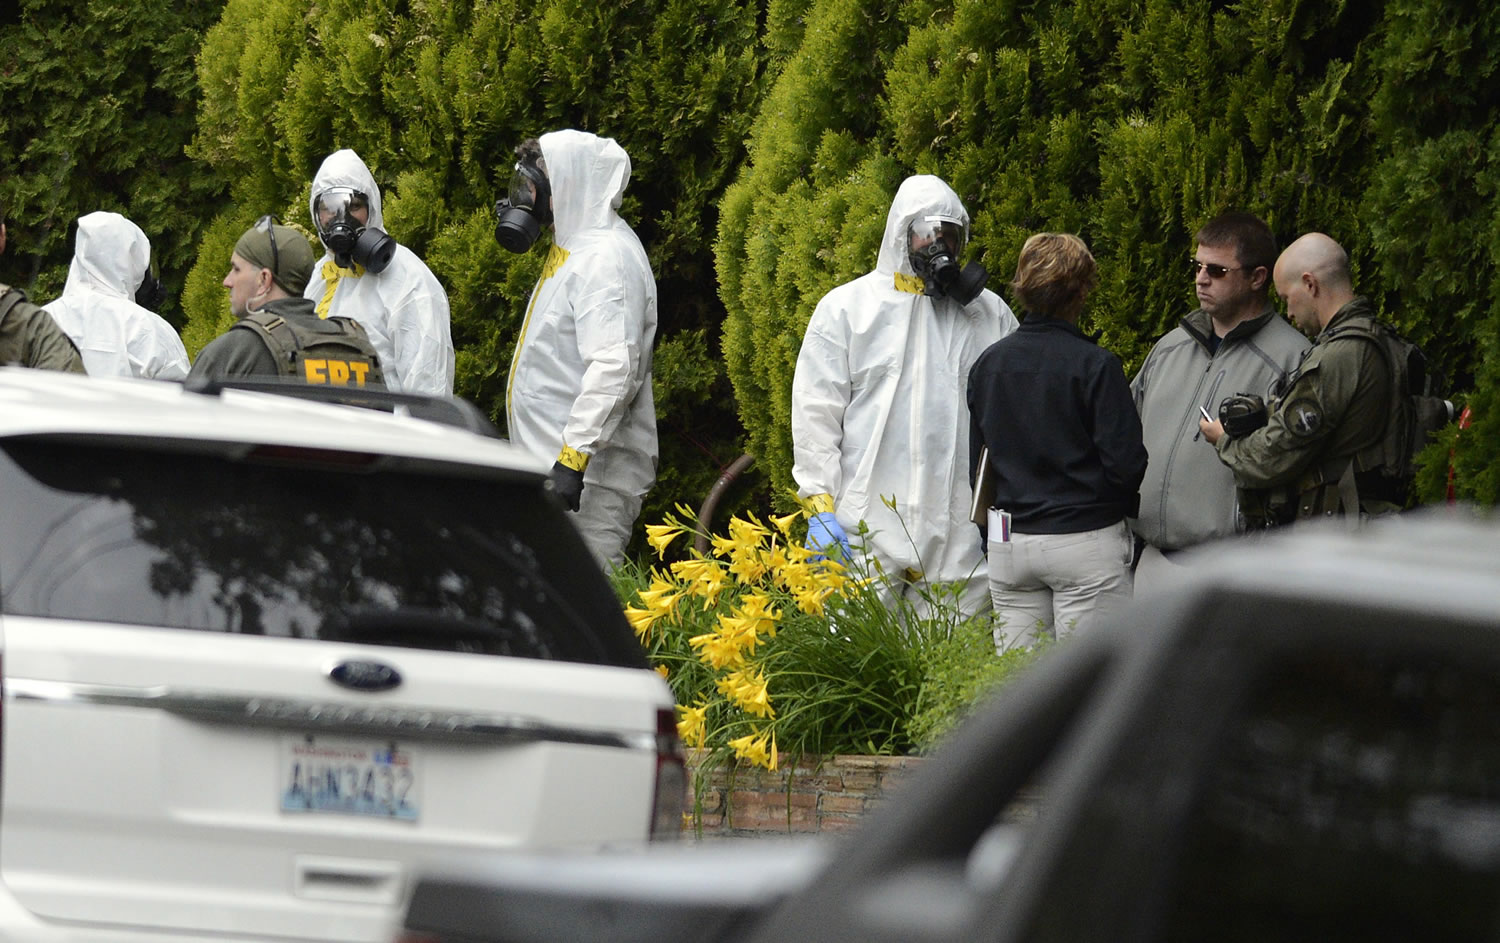 Members of the Joint Federal Haz-Mat Team, FBI, and local law enforcement gather outside a three-story apartment building Saturday in Spokane to execute a search warrant connection with two ricin-laced letters intercepted Tuesday at a post office.